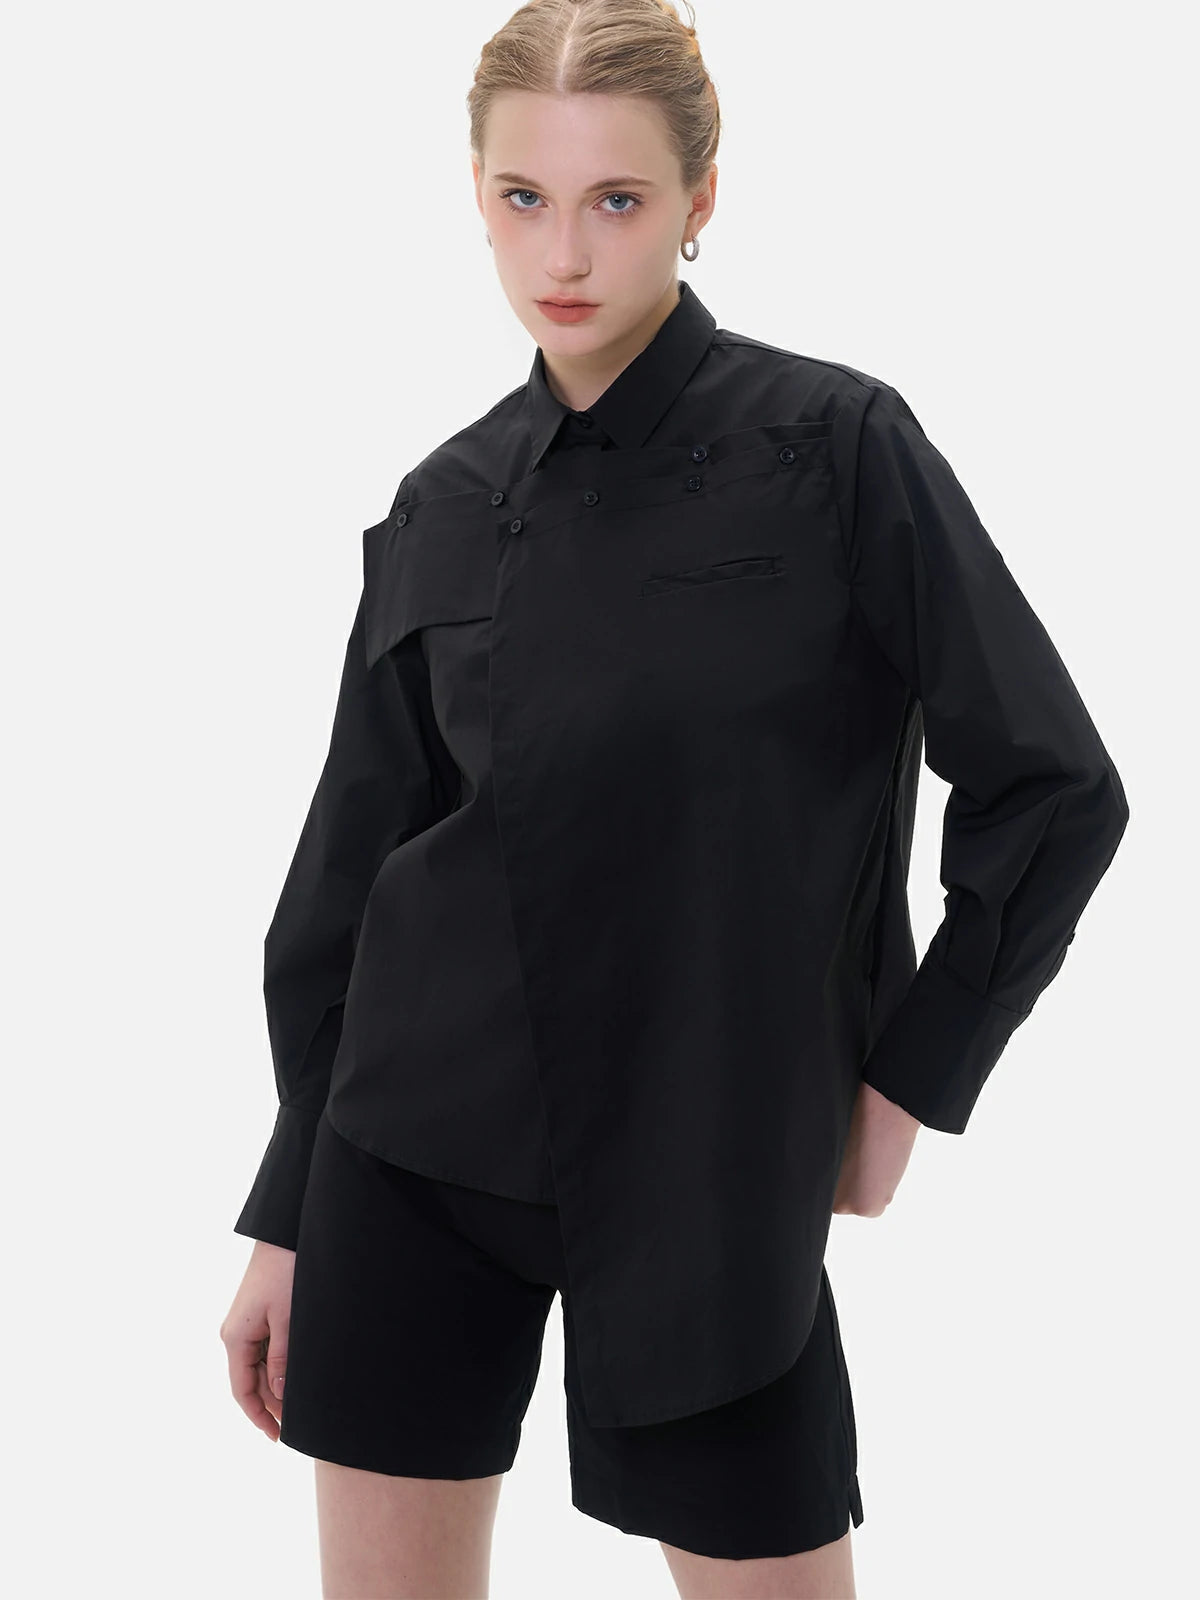 Stylish black shirt with a unique chest panel design, perfect for both professional and casual occasions.